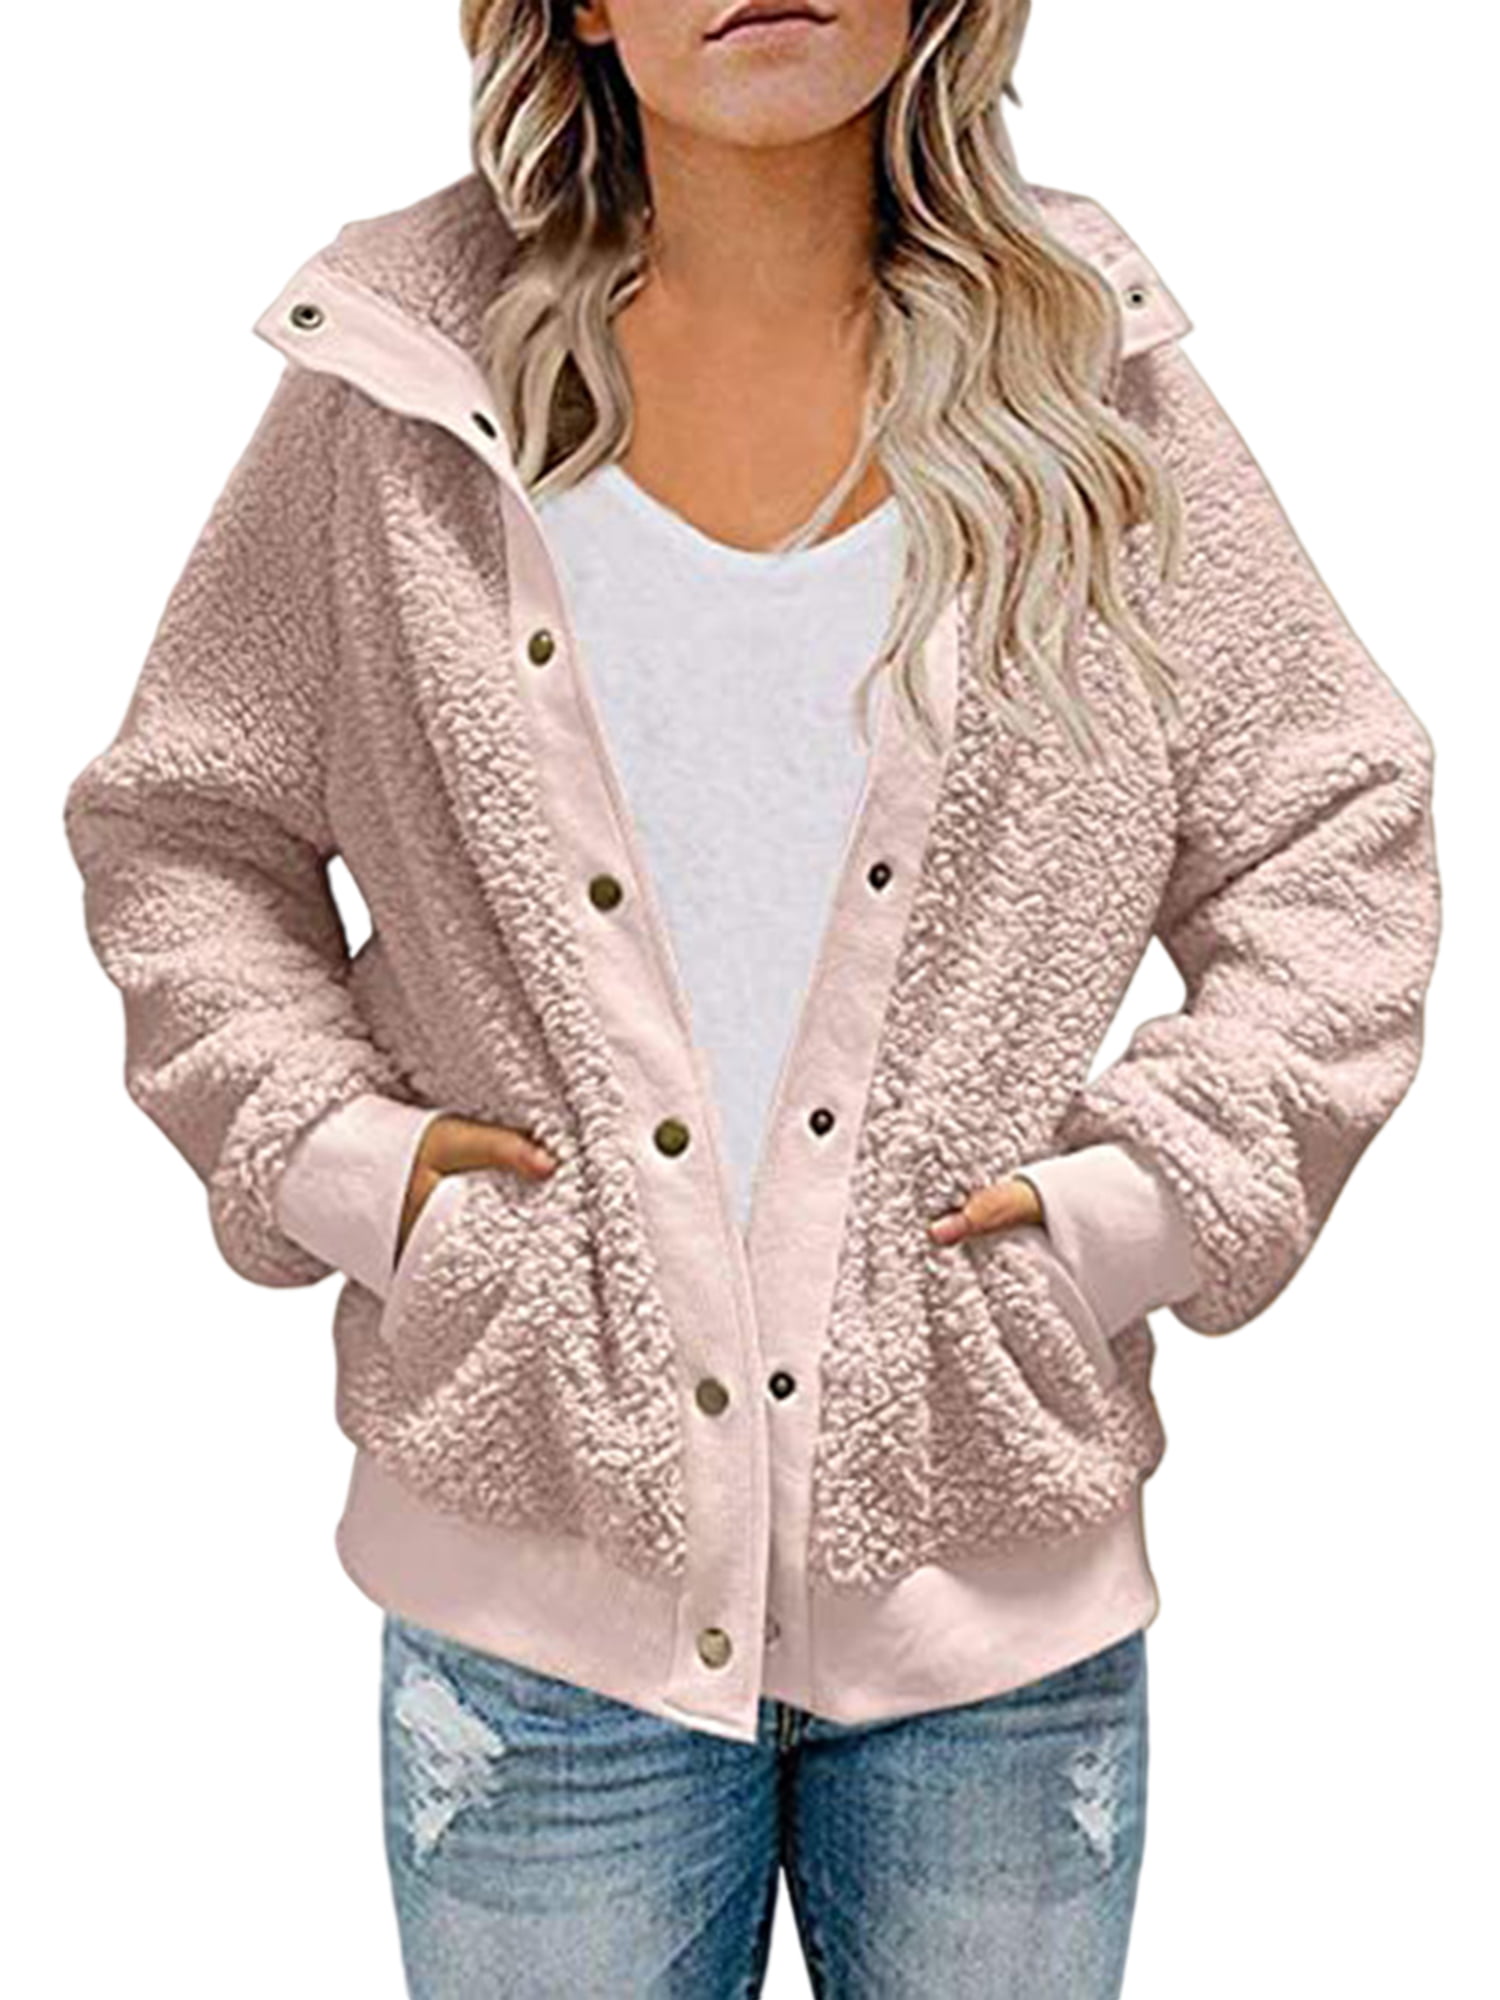 Women Long Sleeve Printed Hooded Jacket S.Charma Fluffy Fuzzy Fleece Thick Coat Outwear with Pocket 